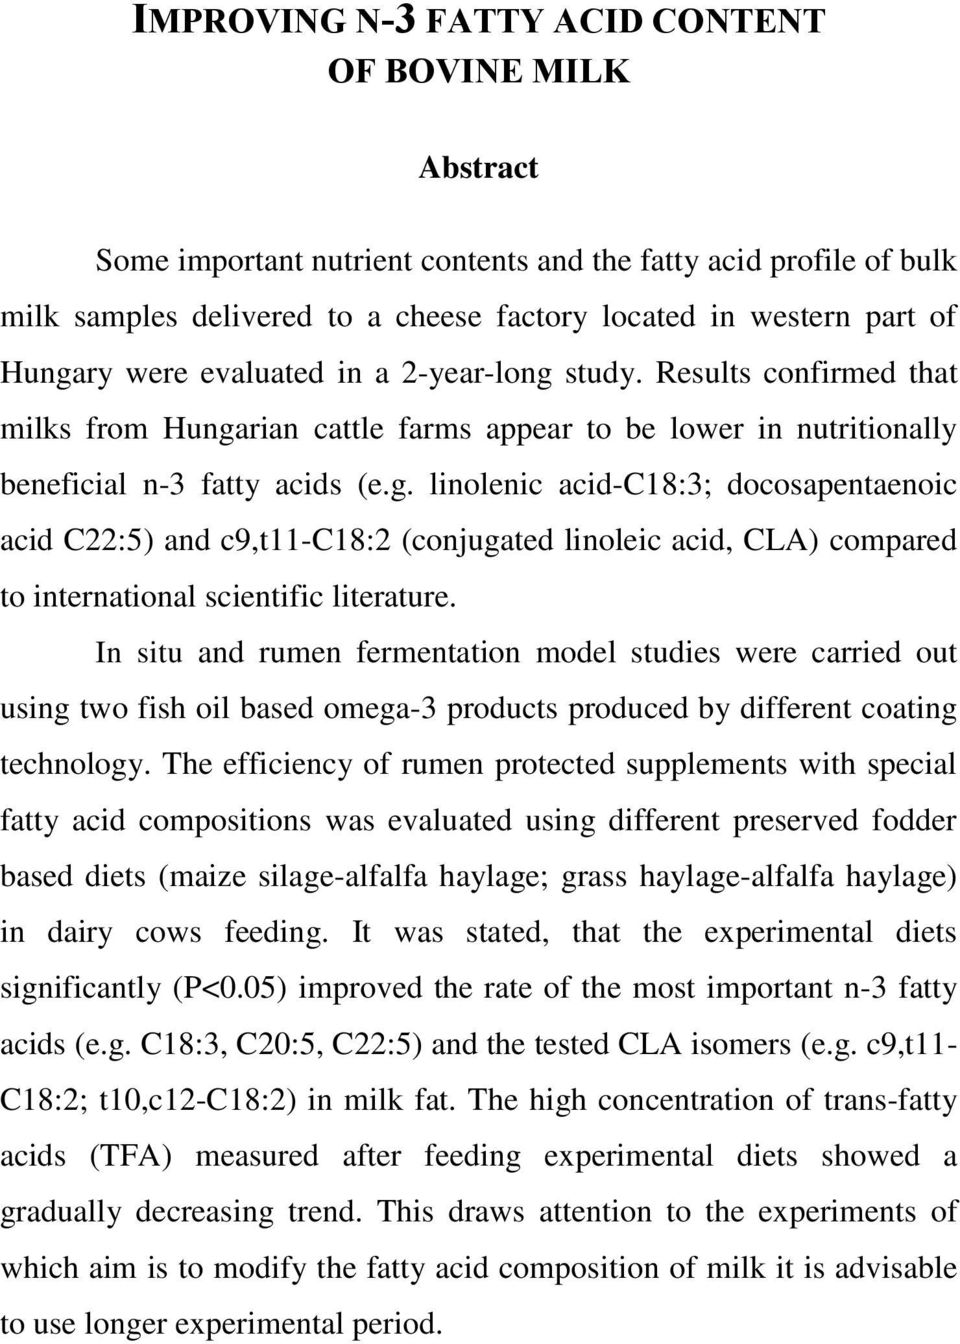 In situ and rumen fermentation model studies were carried out using two fish oil based omega-3 products produced by different coating technology.